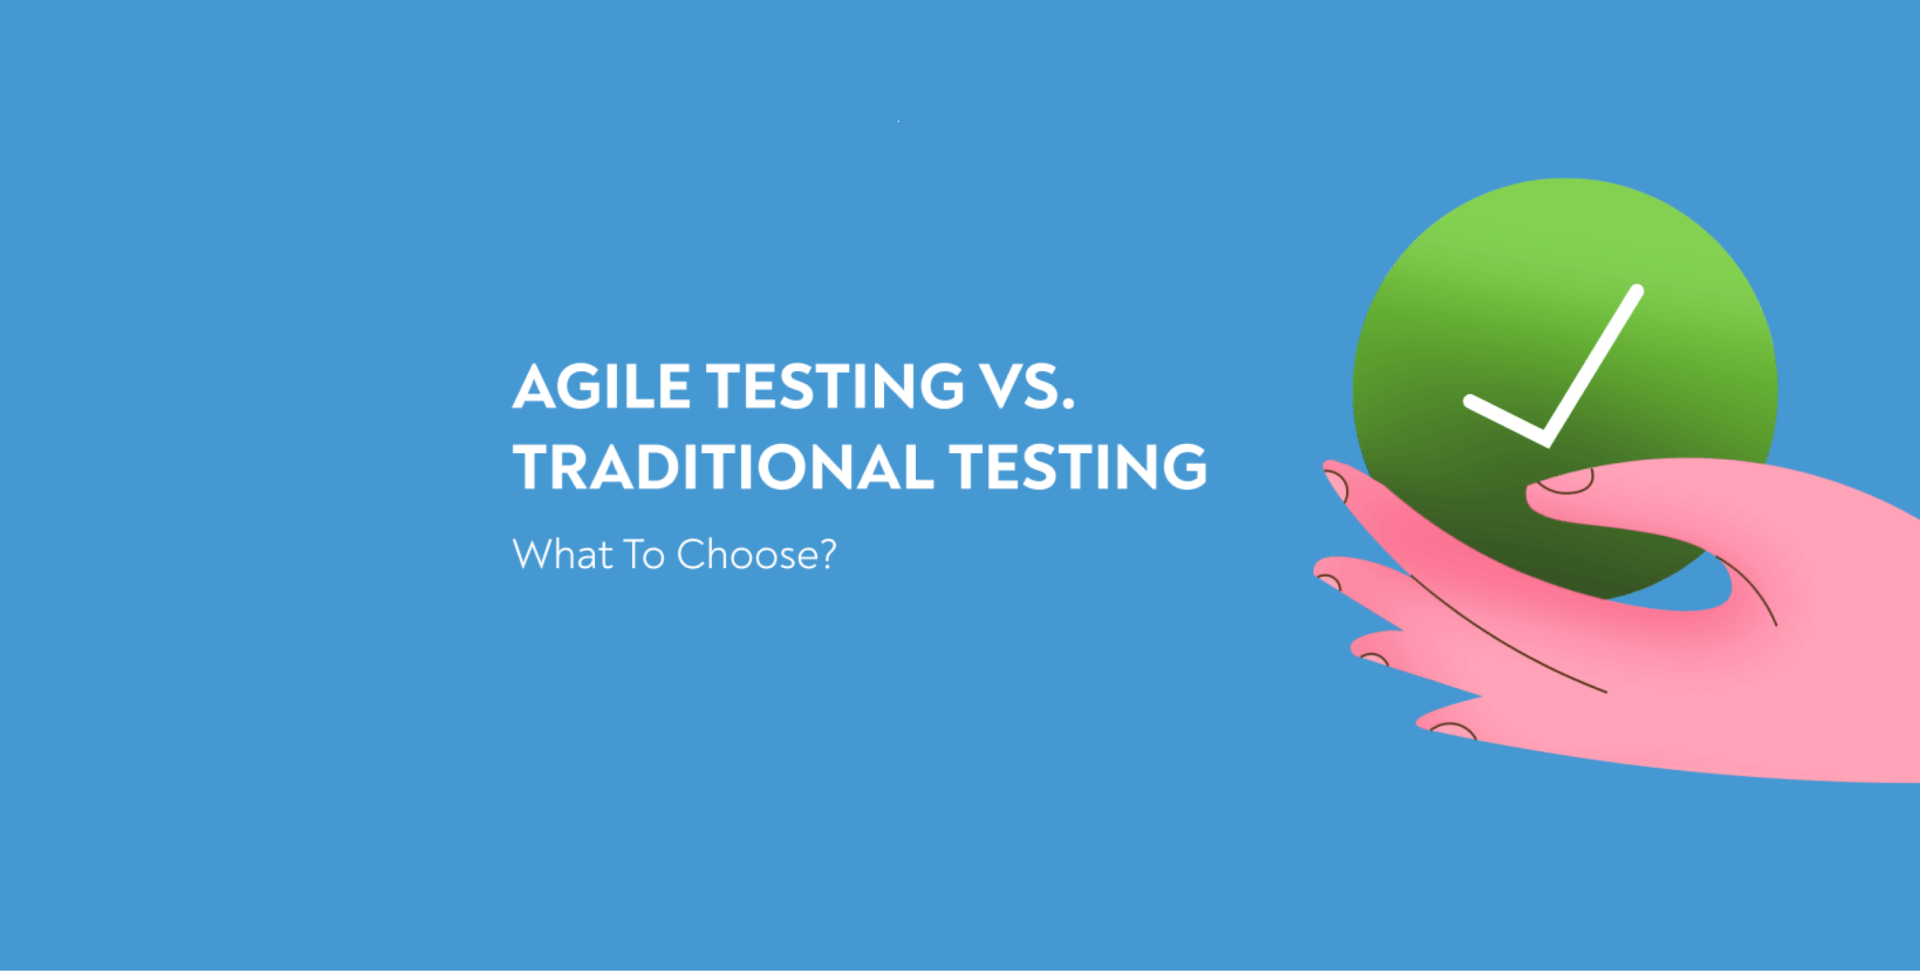 Agile testing vs traditional testing: what to choose?